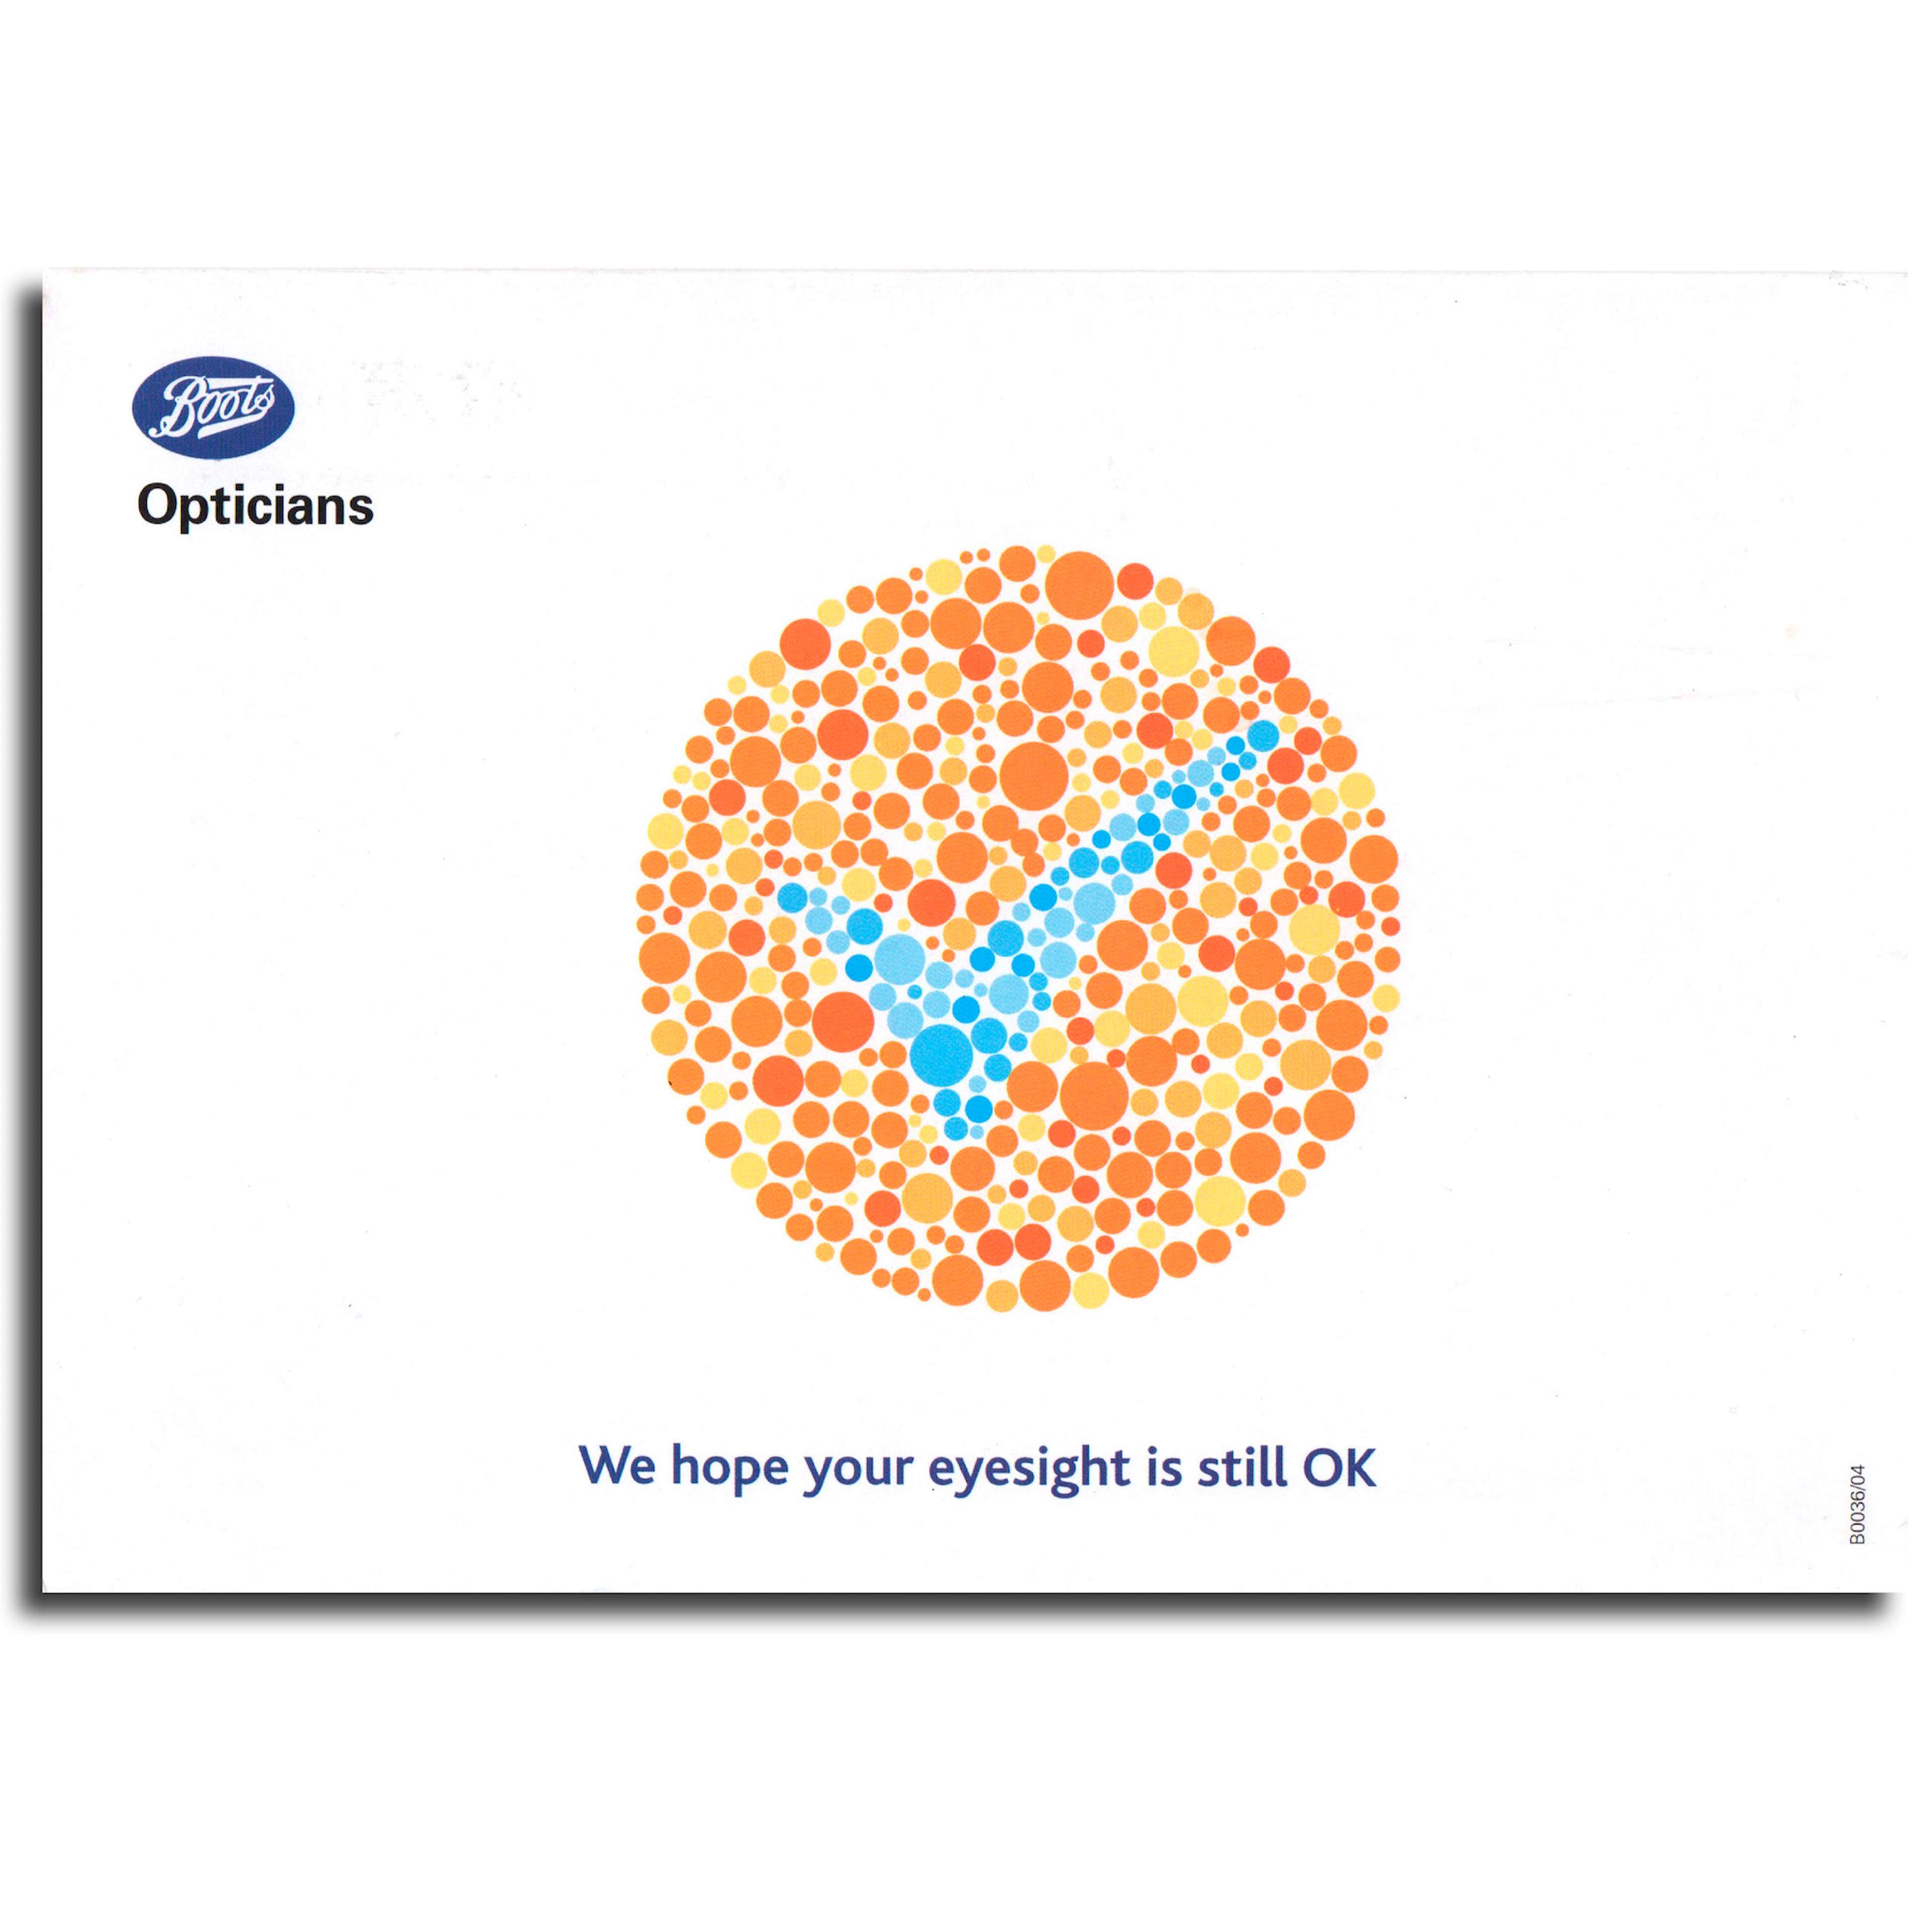 Direct mail piece for Boots Opticians using Ishihara colour blind test.